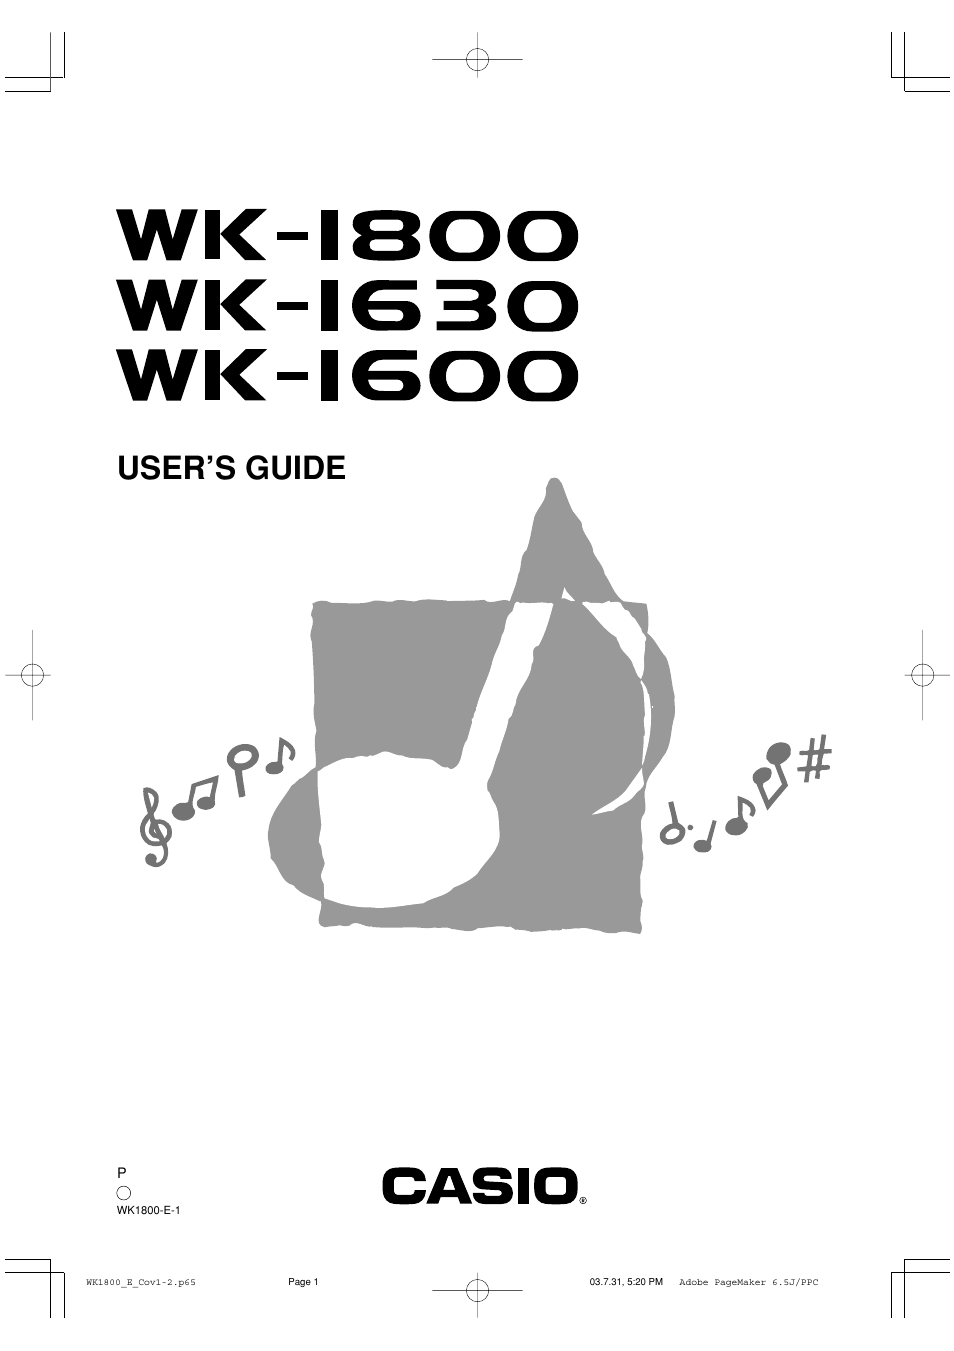 Casio WK1630 User Manual | 96 pages | Original mode | Also for: WK1600